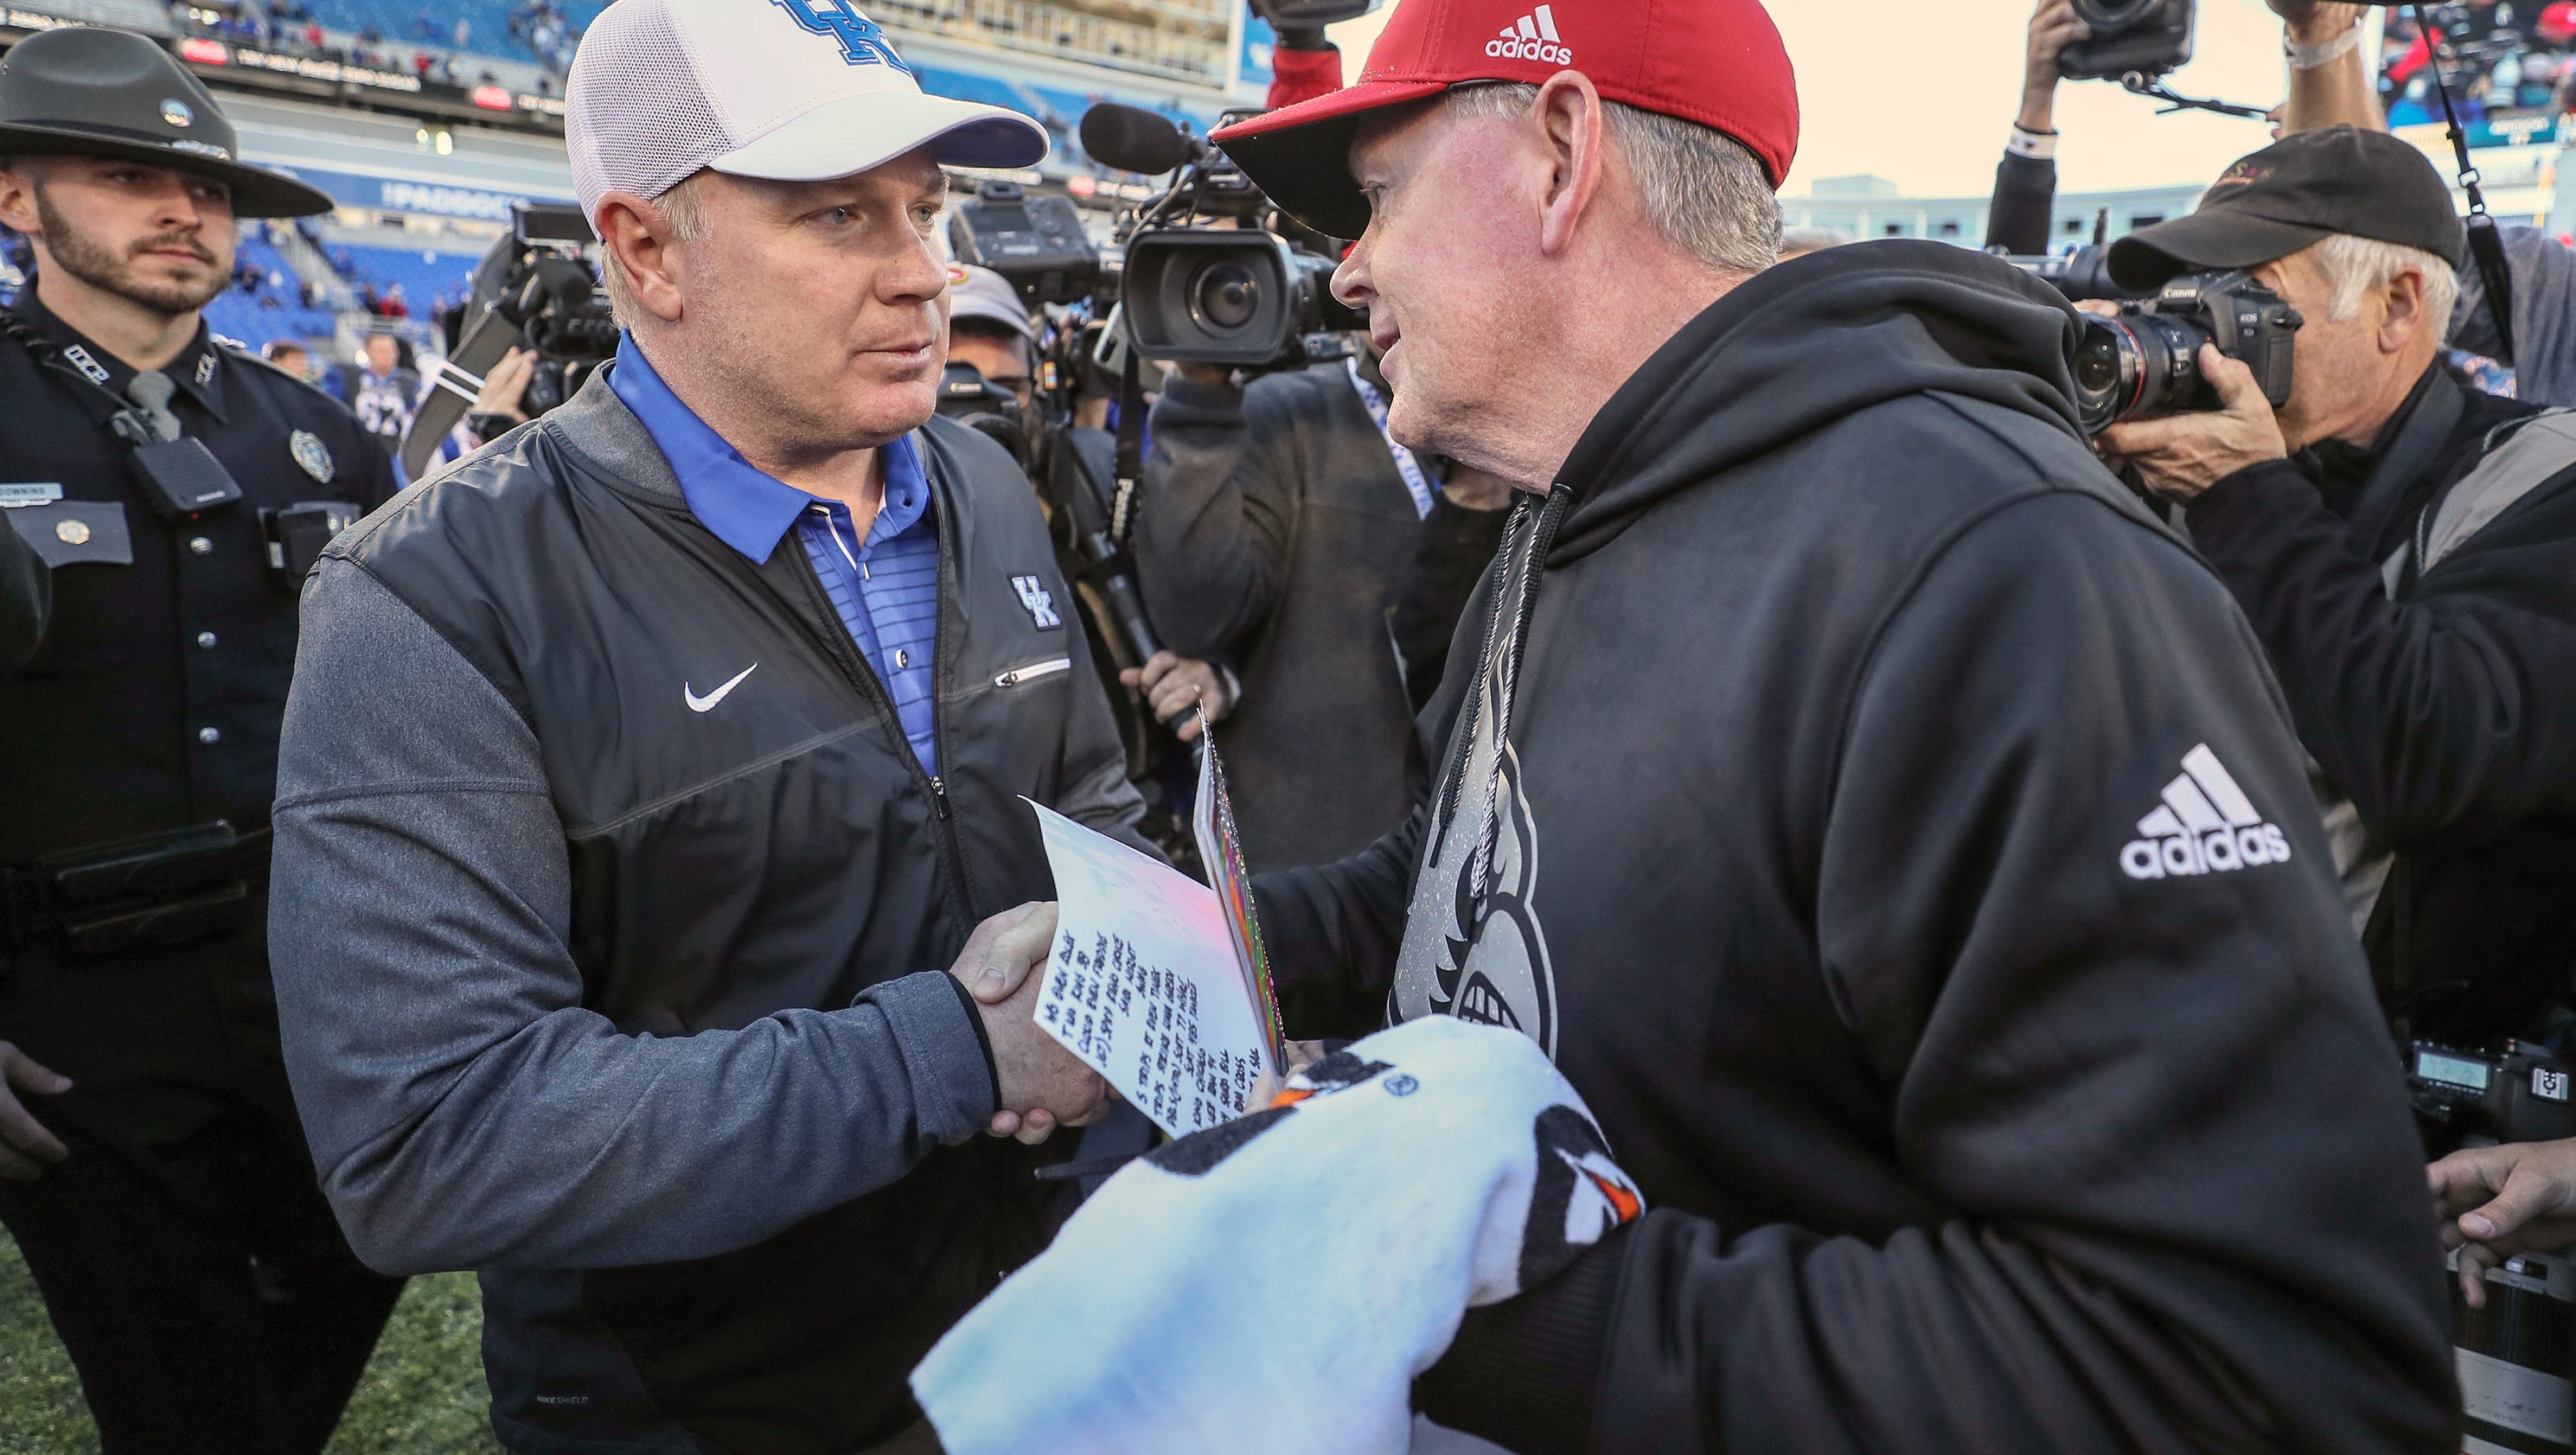 Early signing period may not be the best for football. But it's good for U of L and UK | Estes